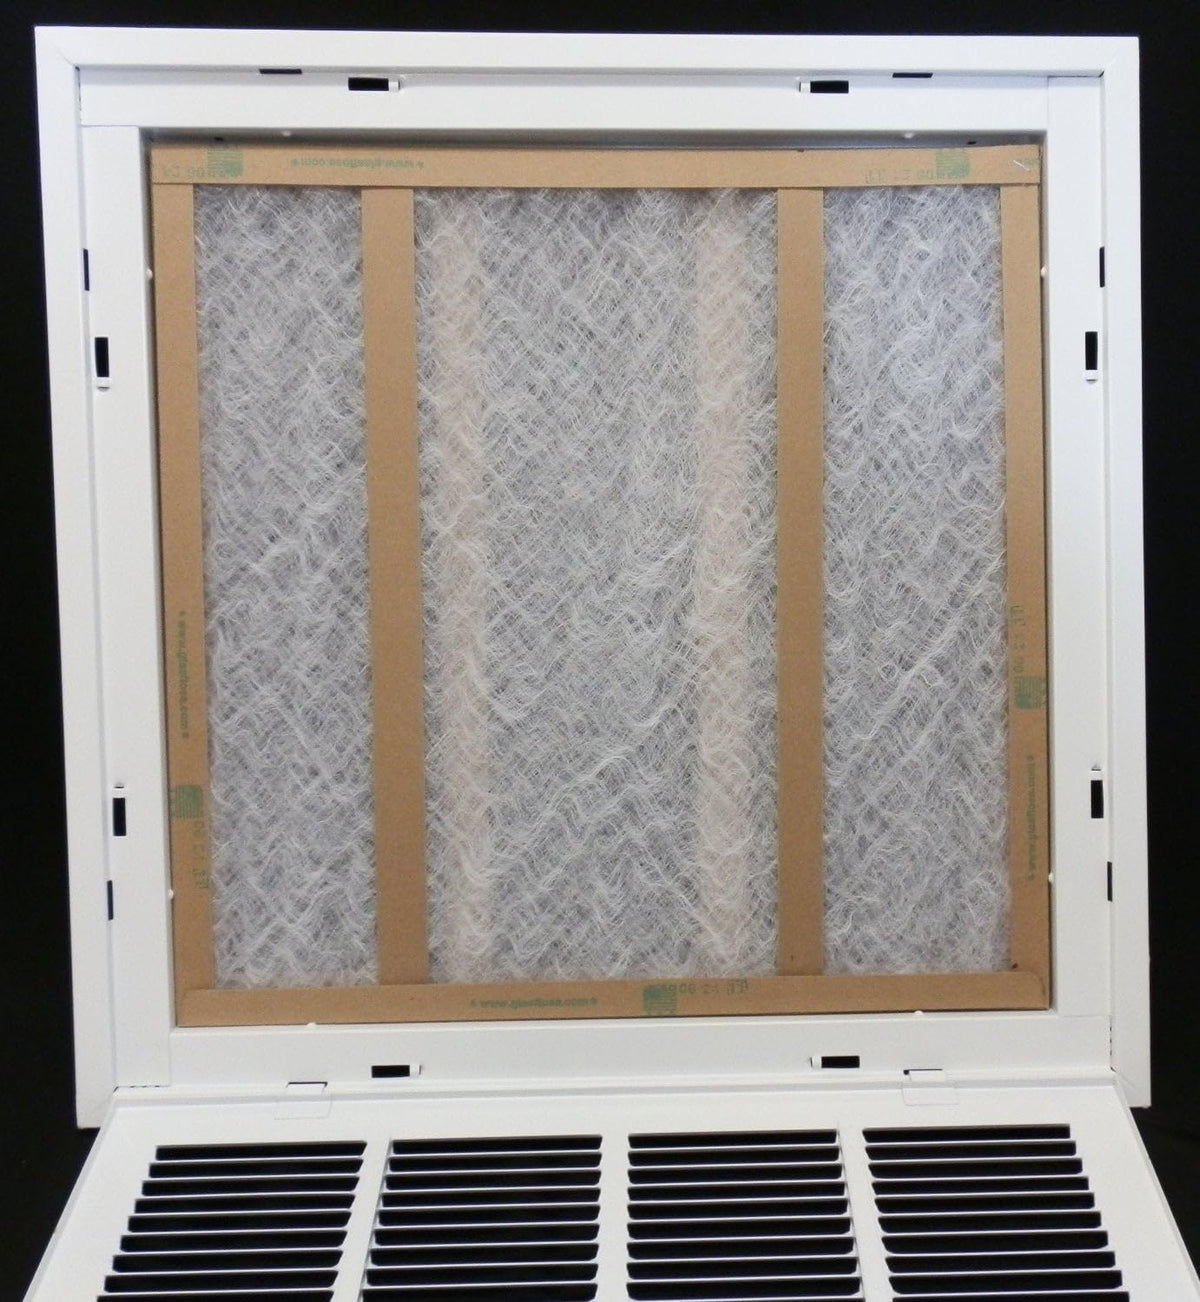 28&quot; X 24&quot; Steel Return Air Filter Grille for 1&quot; Filter - Removable Frame - [Outer Dimensions: 30 5/8&quot; X 26 5/8&quot;]